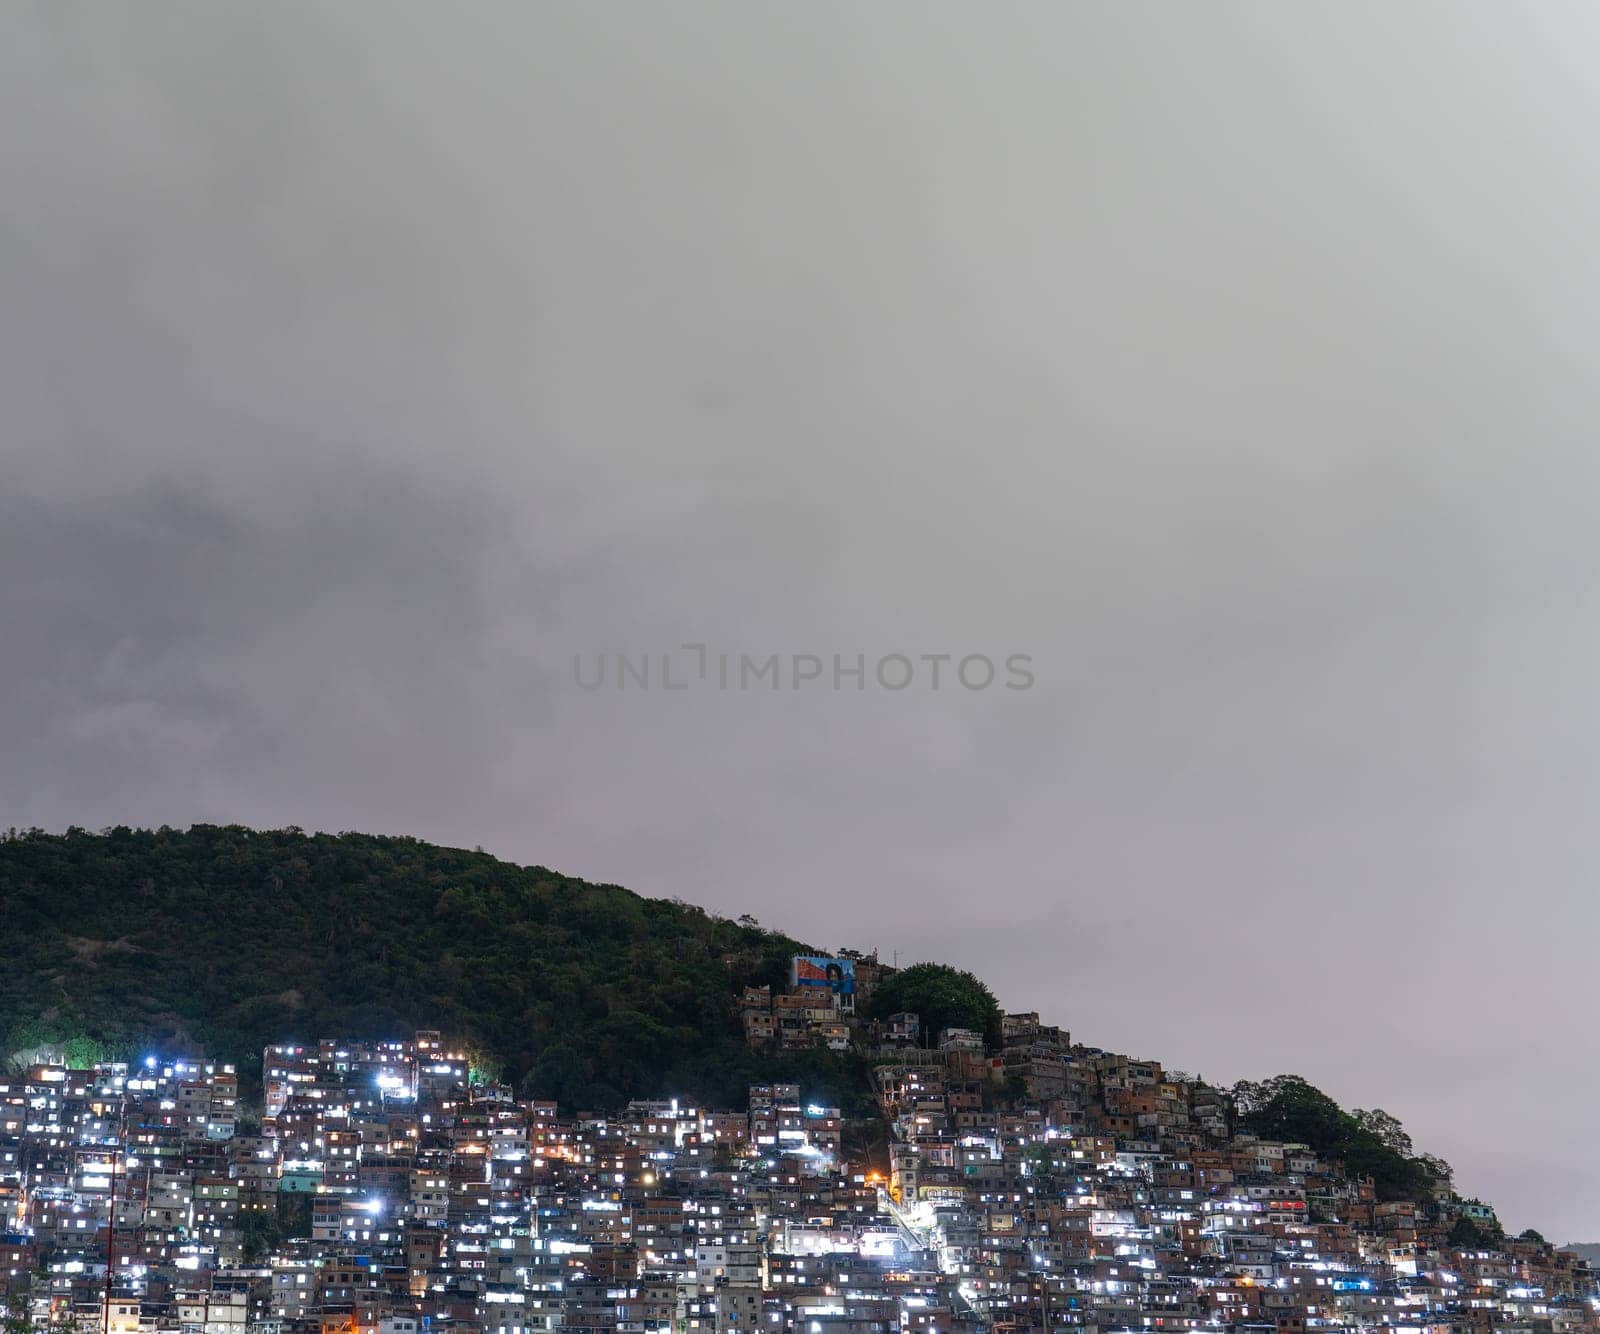 Illuminated favela on a hillside at dusk with compact housing and overcast skies.